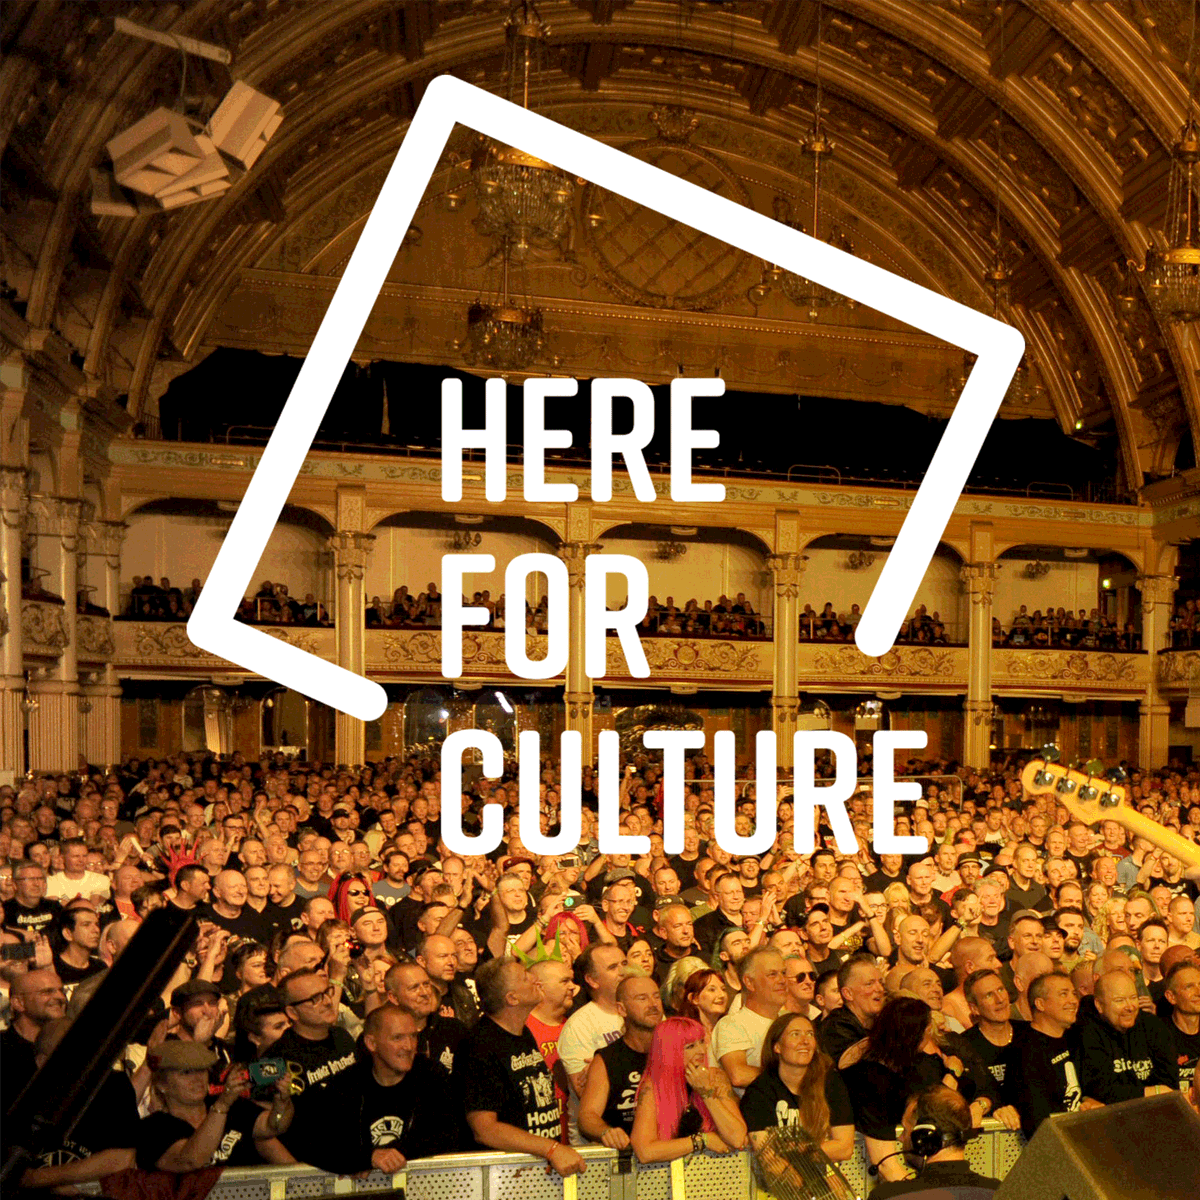 Finally some good news in these challenging times. The DCMS have announced a new round of funding and loans. We're pleased to say that Rebellion has been accepted for some much needed support. This ensures we can continue to plan for the future and that we can be #HereForCulture